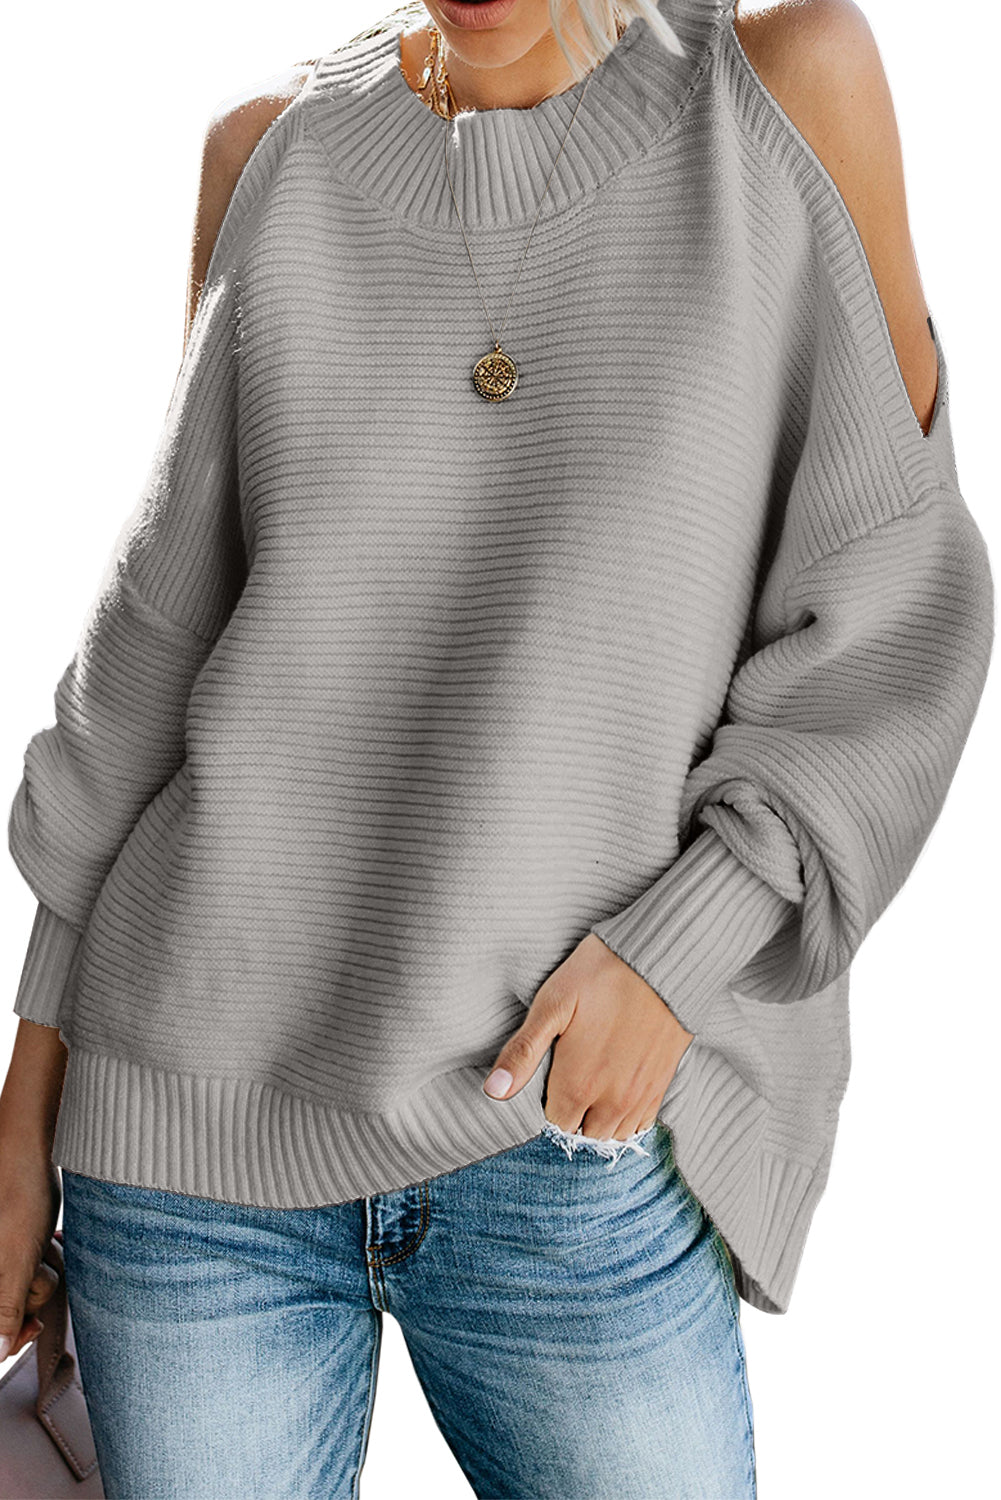 Gray Women's Winter Casual Loose Long Sleeve Solid Color Crewneck Cold Shoulder Pullover Sweater LC270052-11